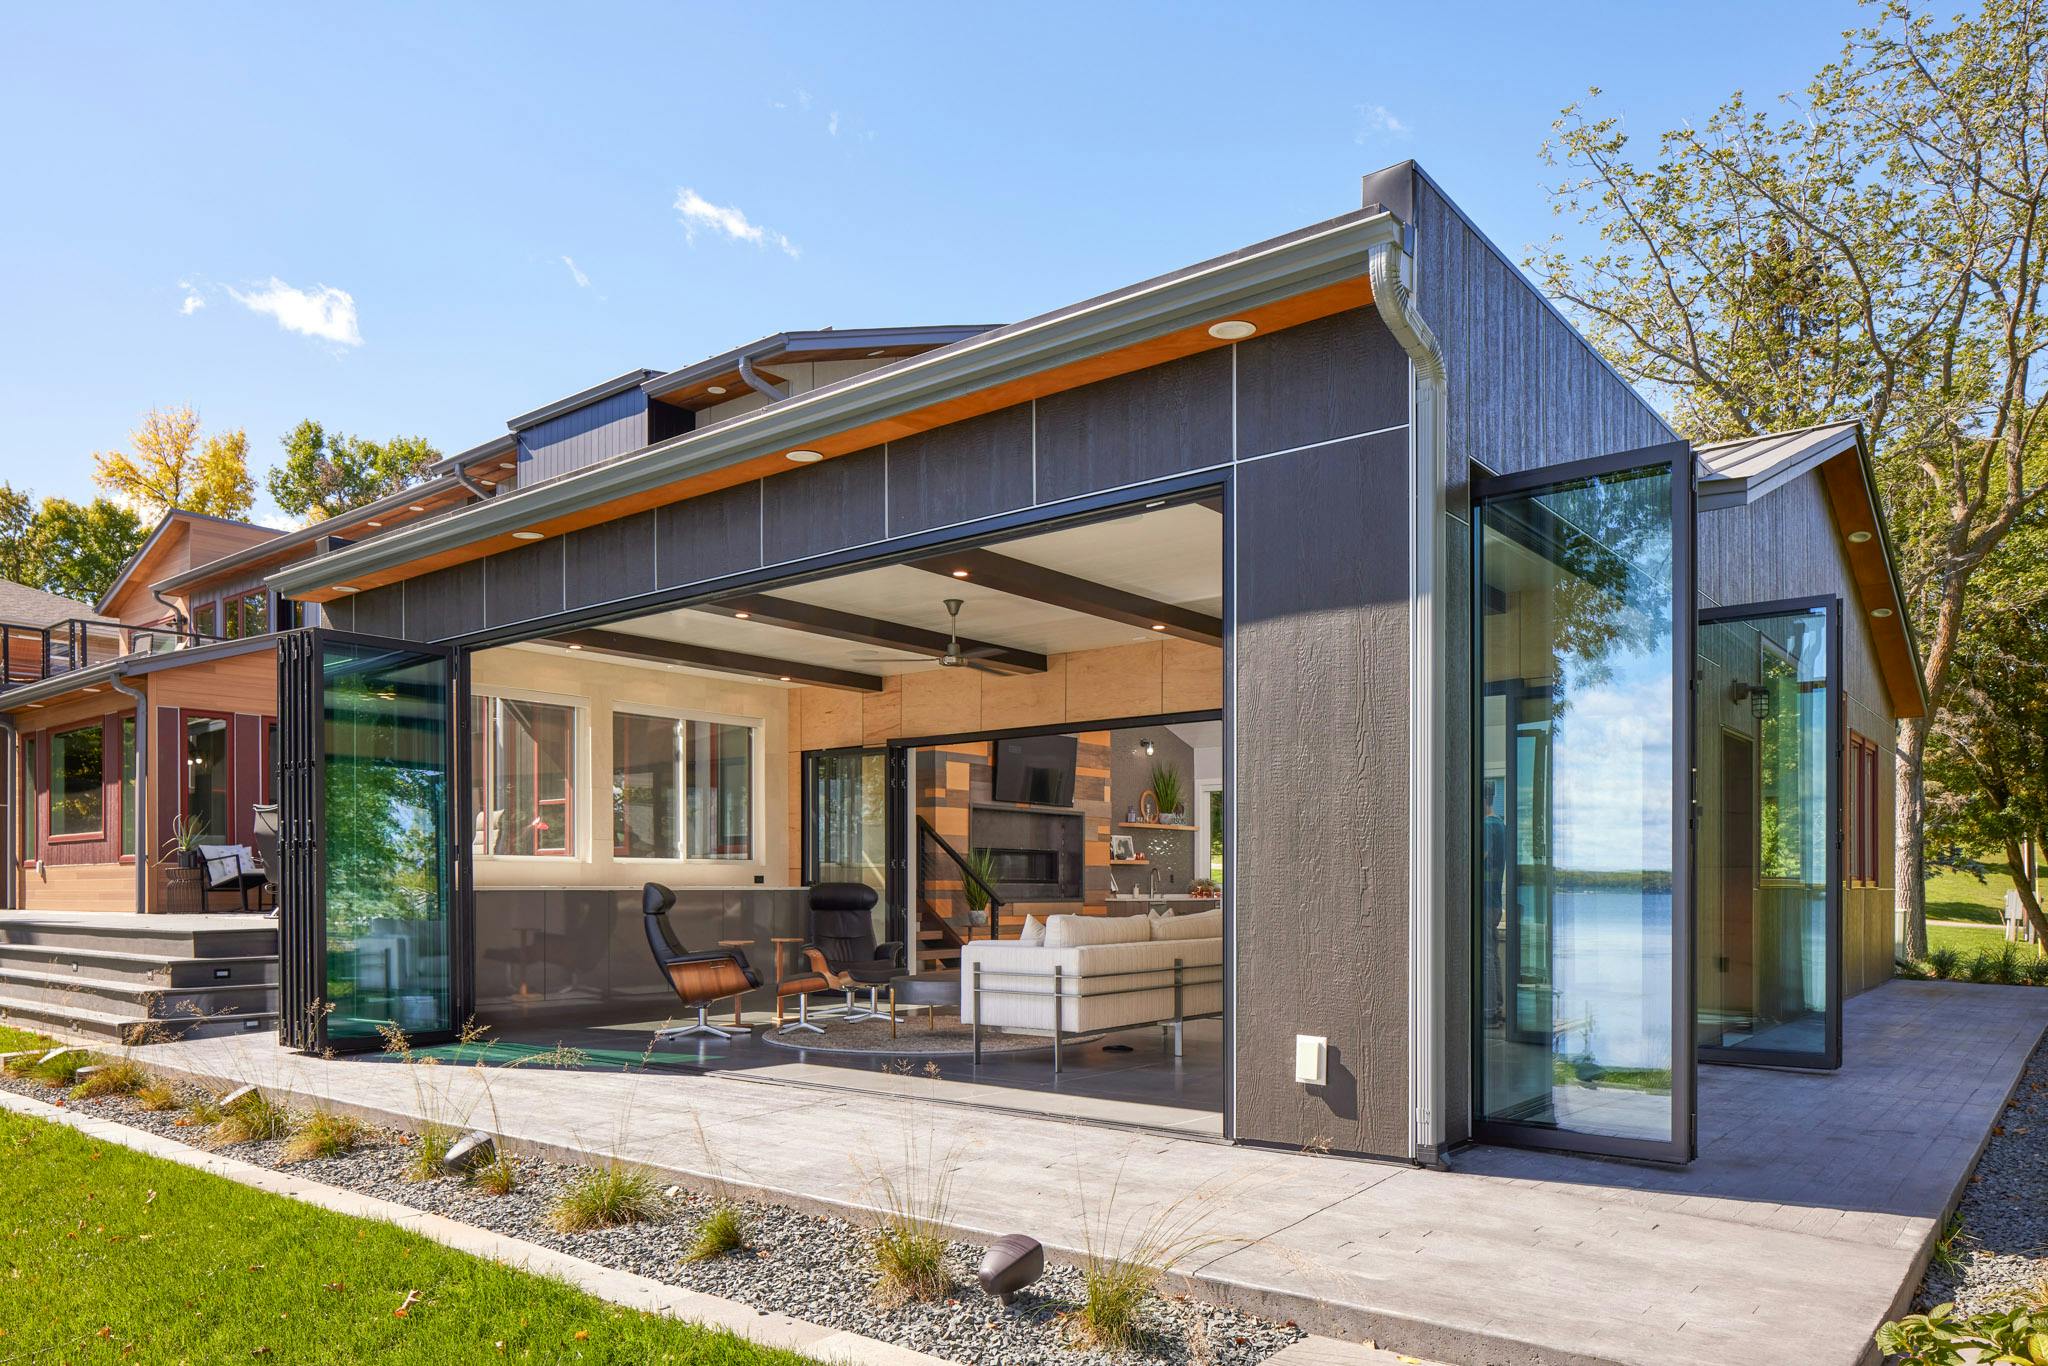 Generation 4 Folding Glass Walls by NanaWall open to the outdoors